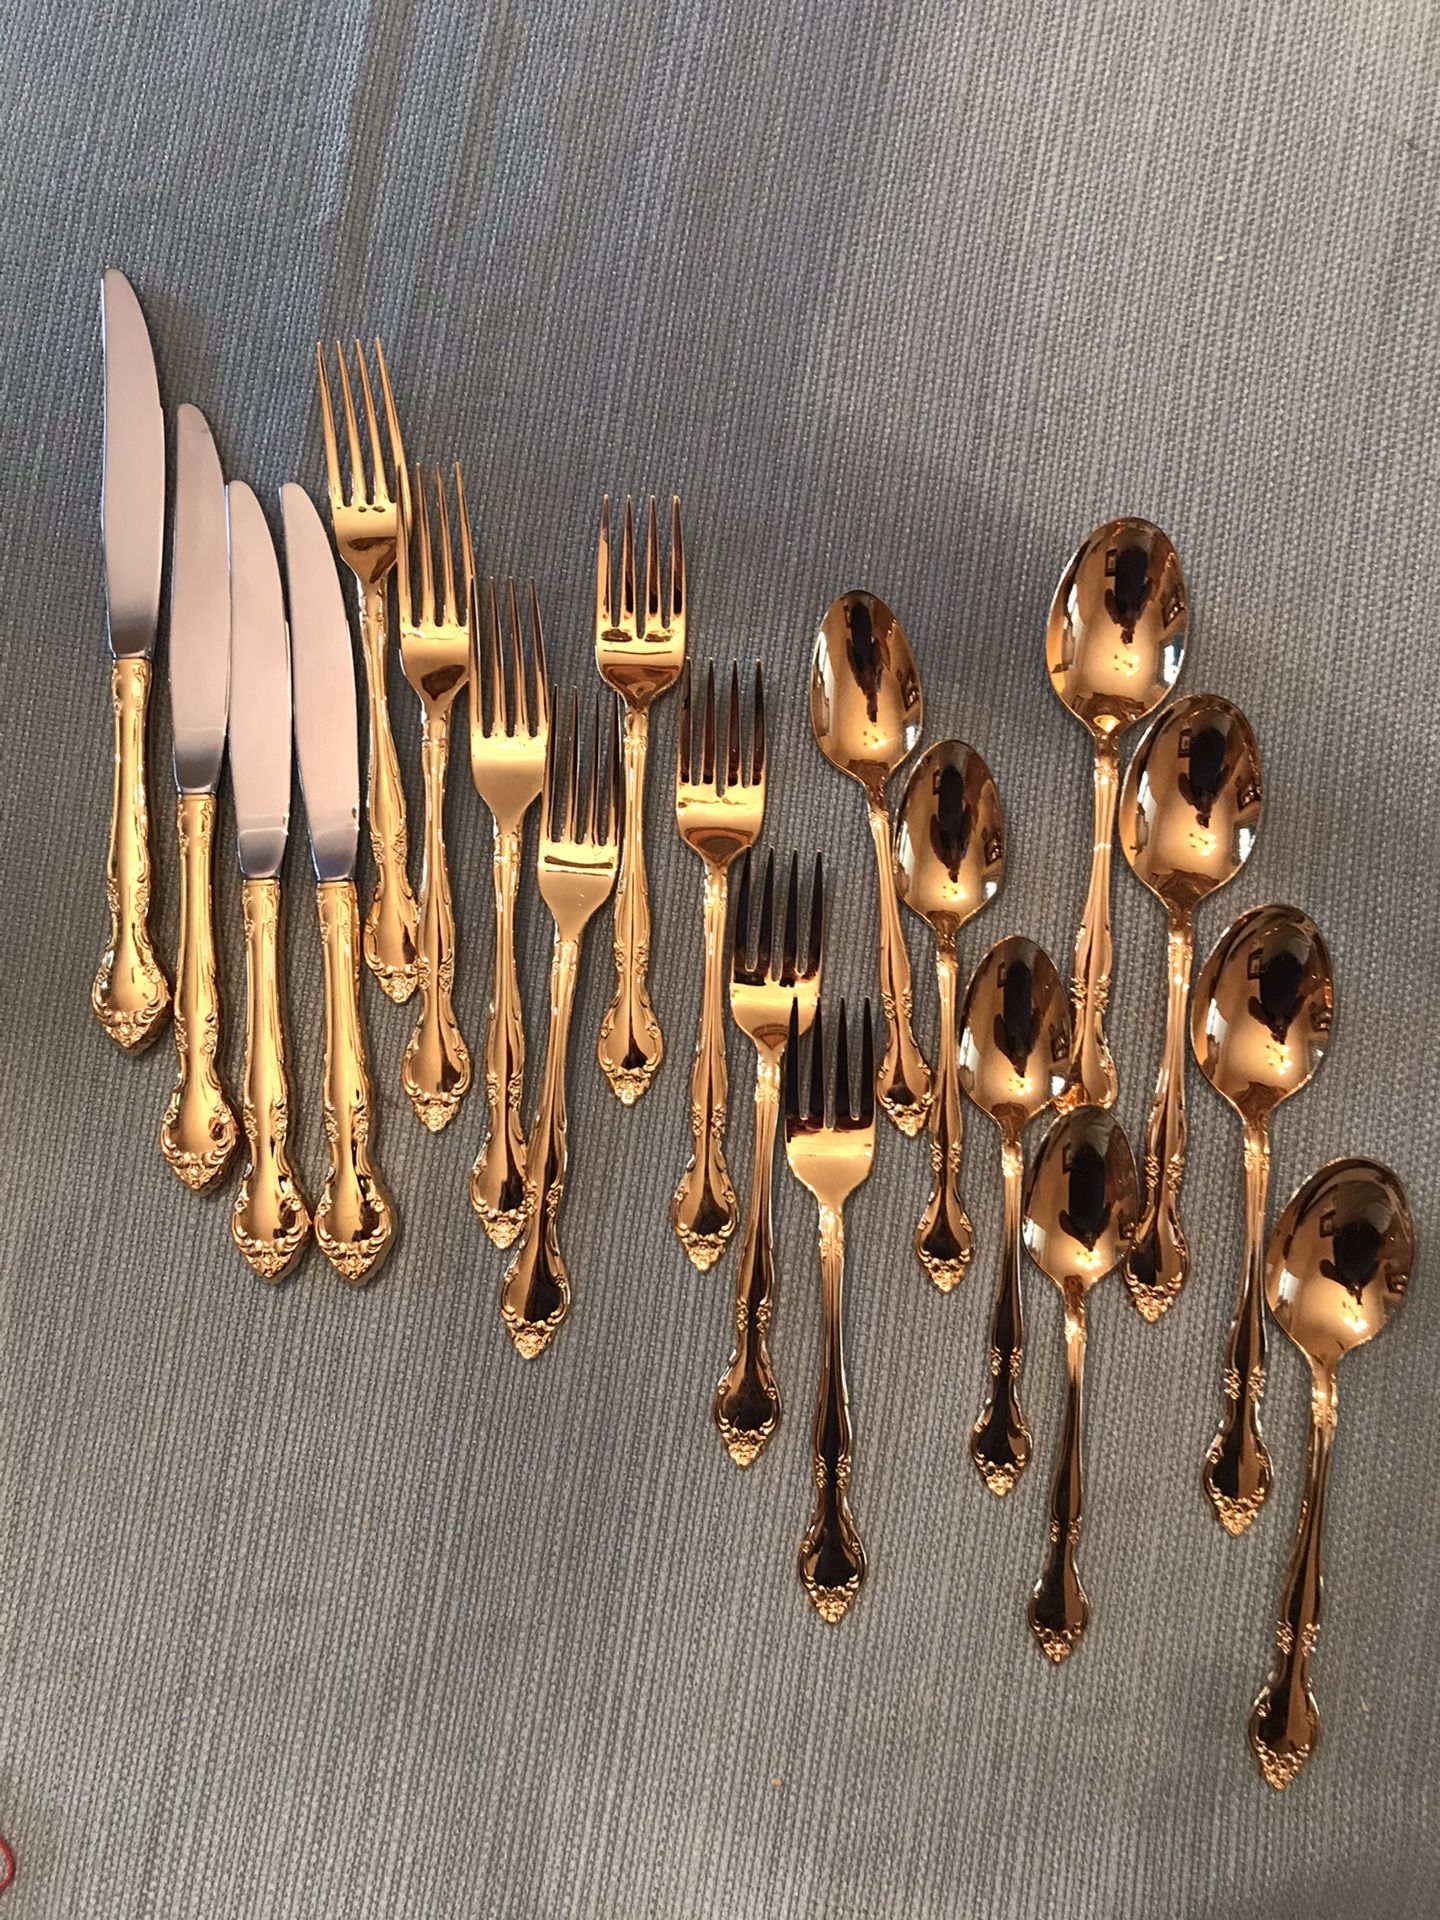 20 piece Gold Plated Flatware 